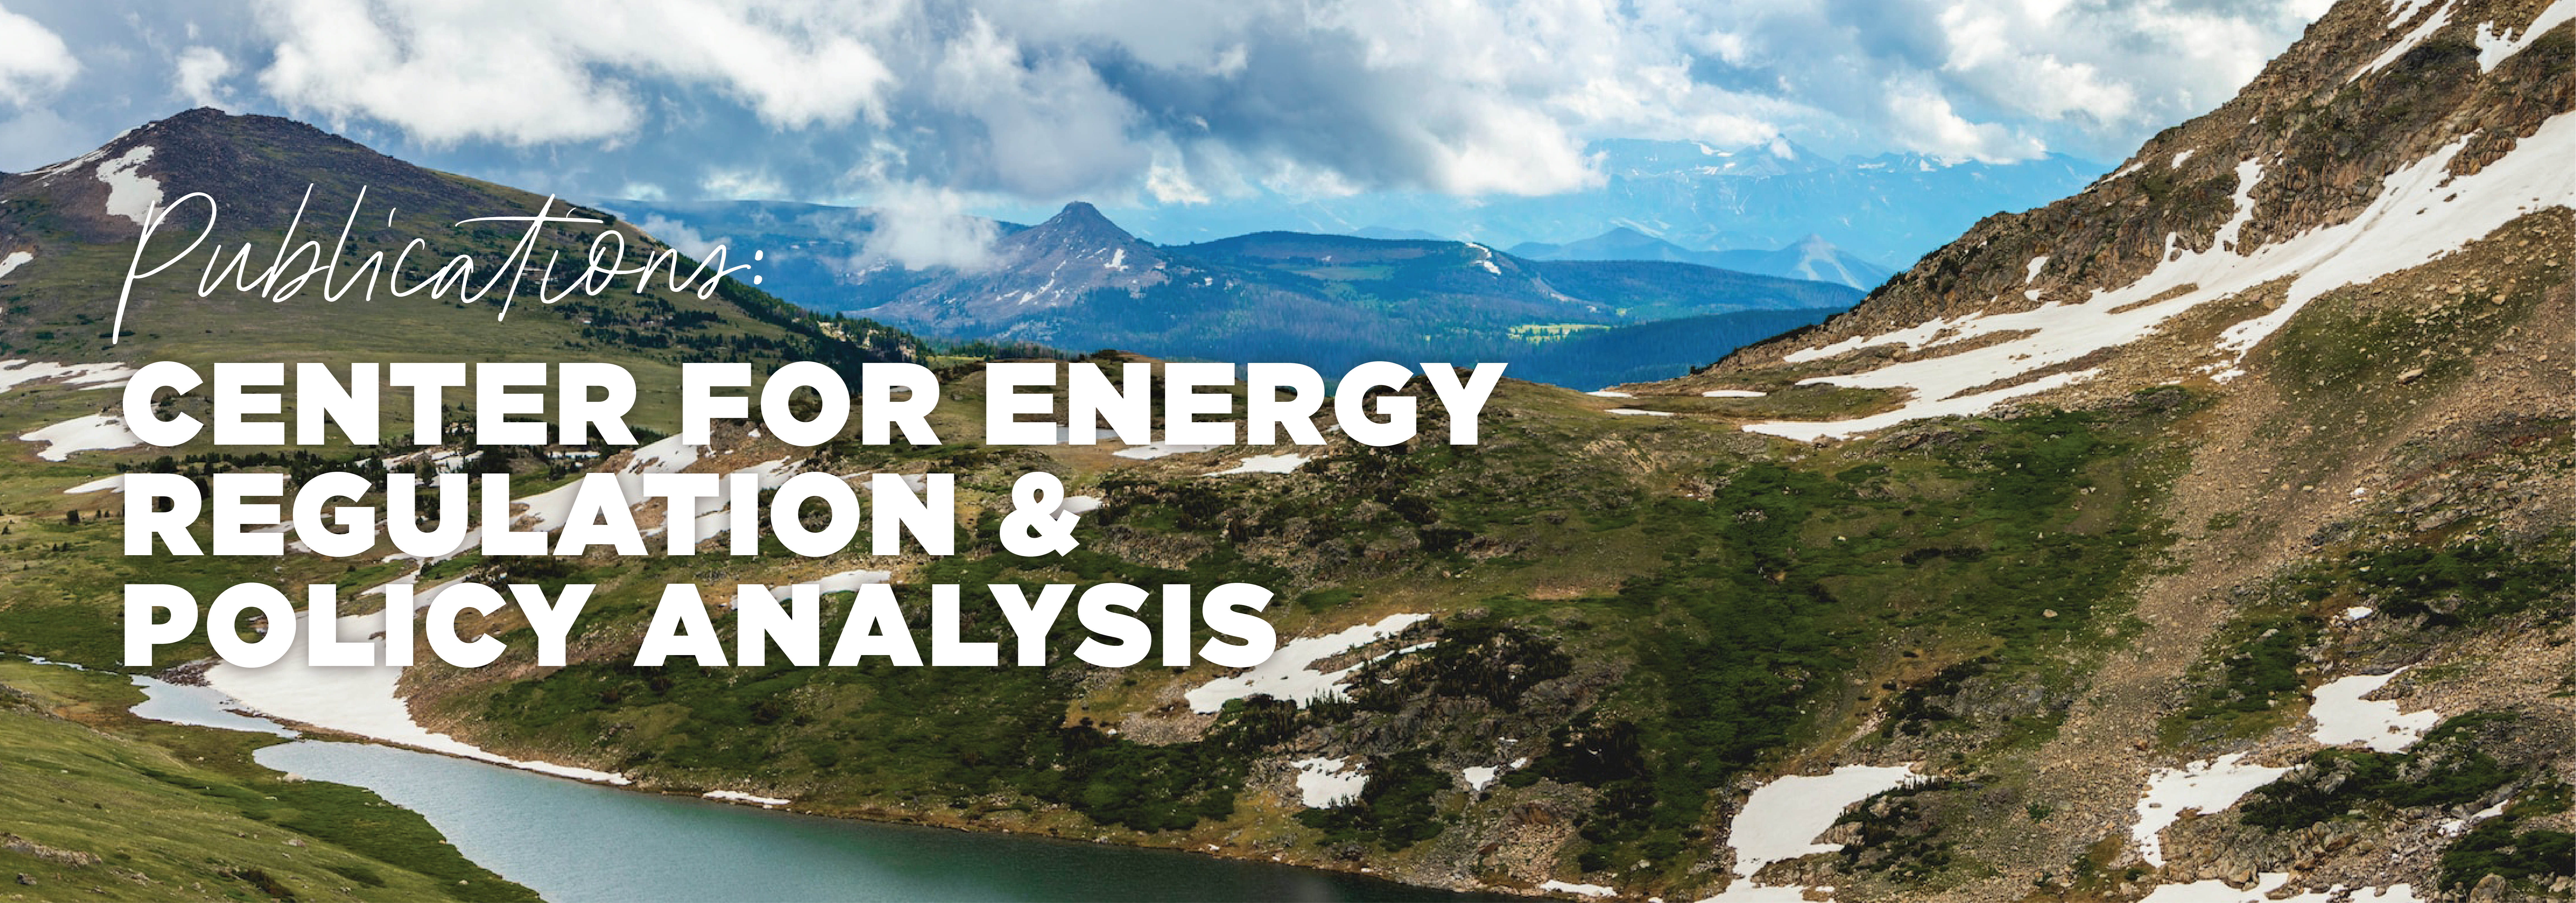 Publication areas: Center for Energy Regulation and Policy Analysis over research samples